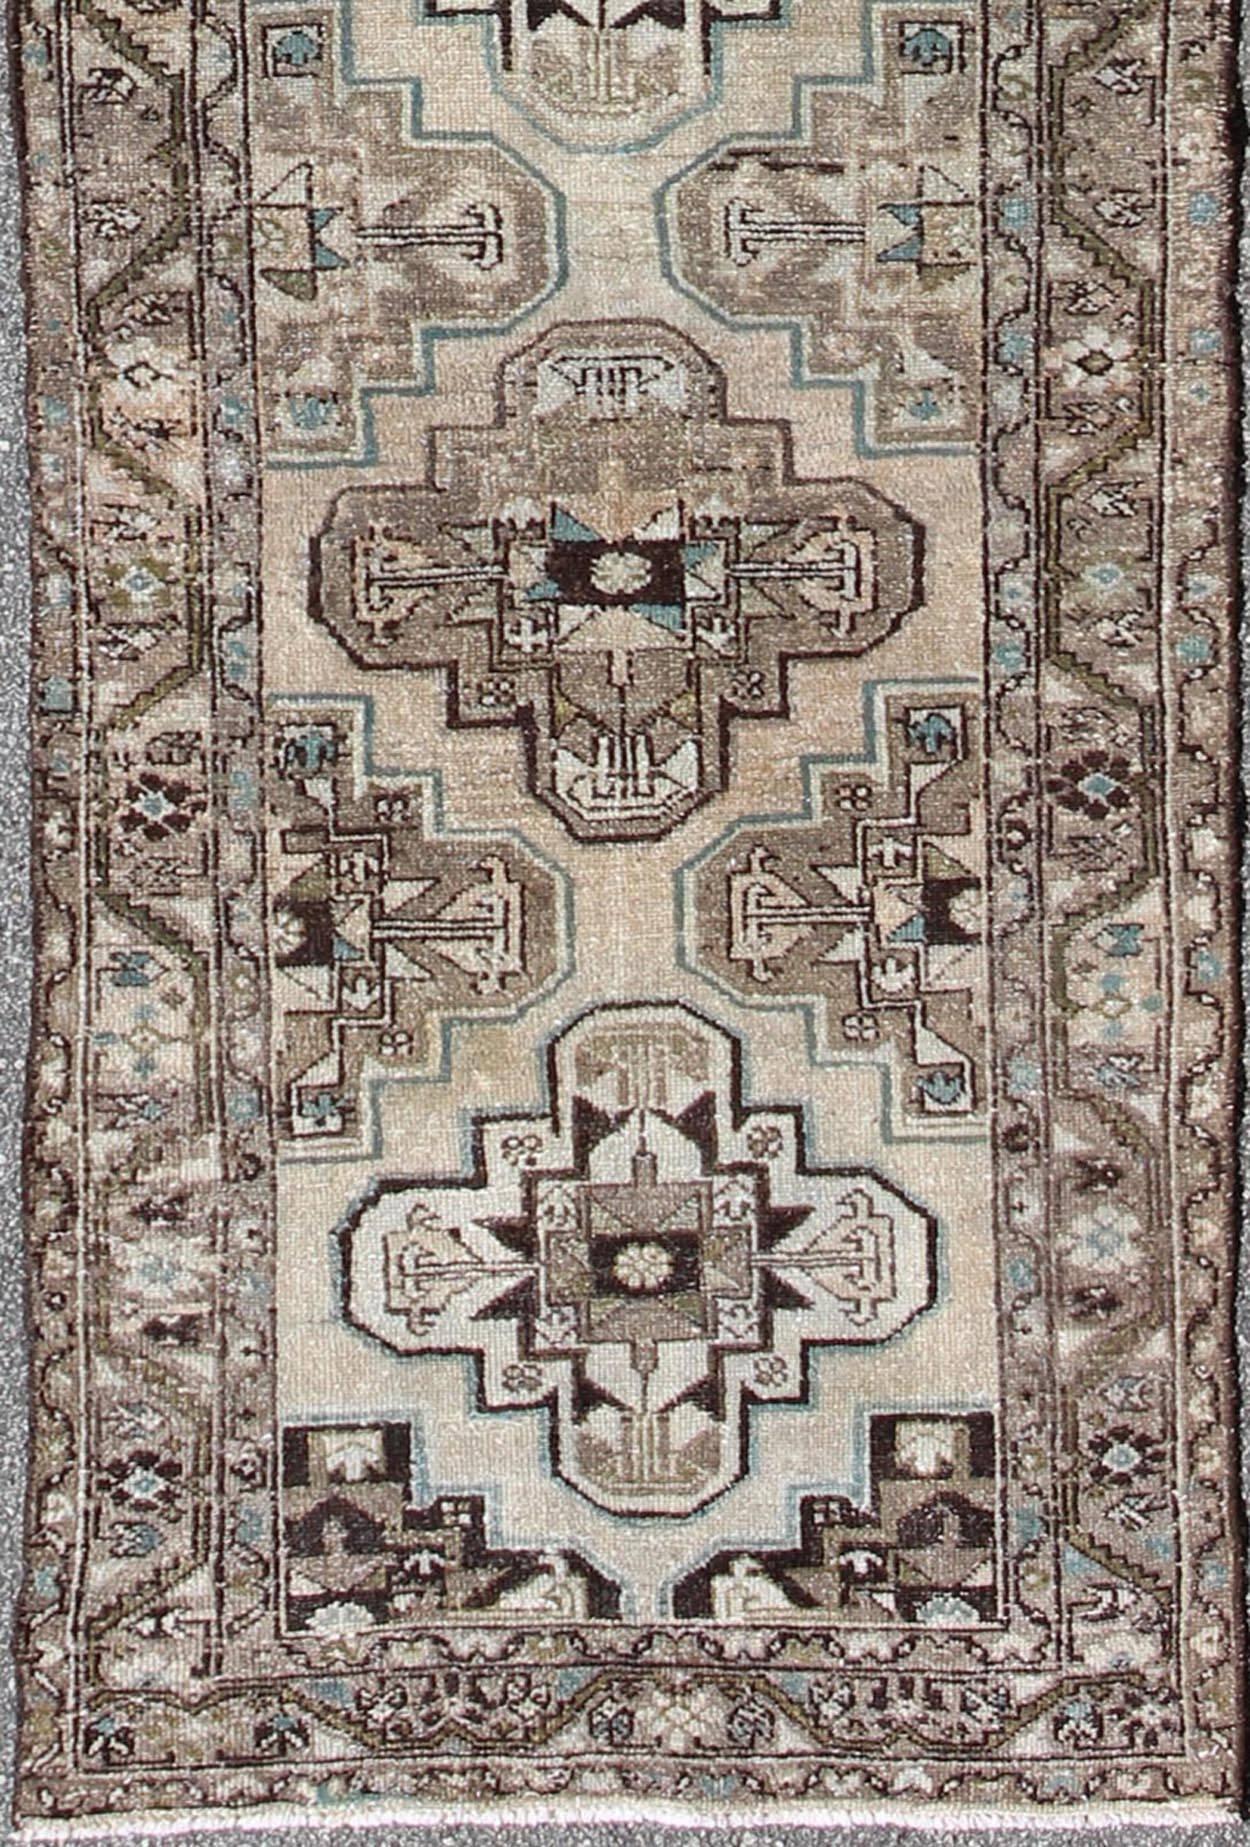 Antique Persian Hamadan runner with stacked medallion in taupe, ivory, Black, Brown and blue, rug kbe-h-701-11, country of origin / type : Iran / Hamadan, circa 1900

Ce long chemin de table persan antique de Hamadan, datant du début du XXe siècle,